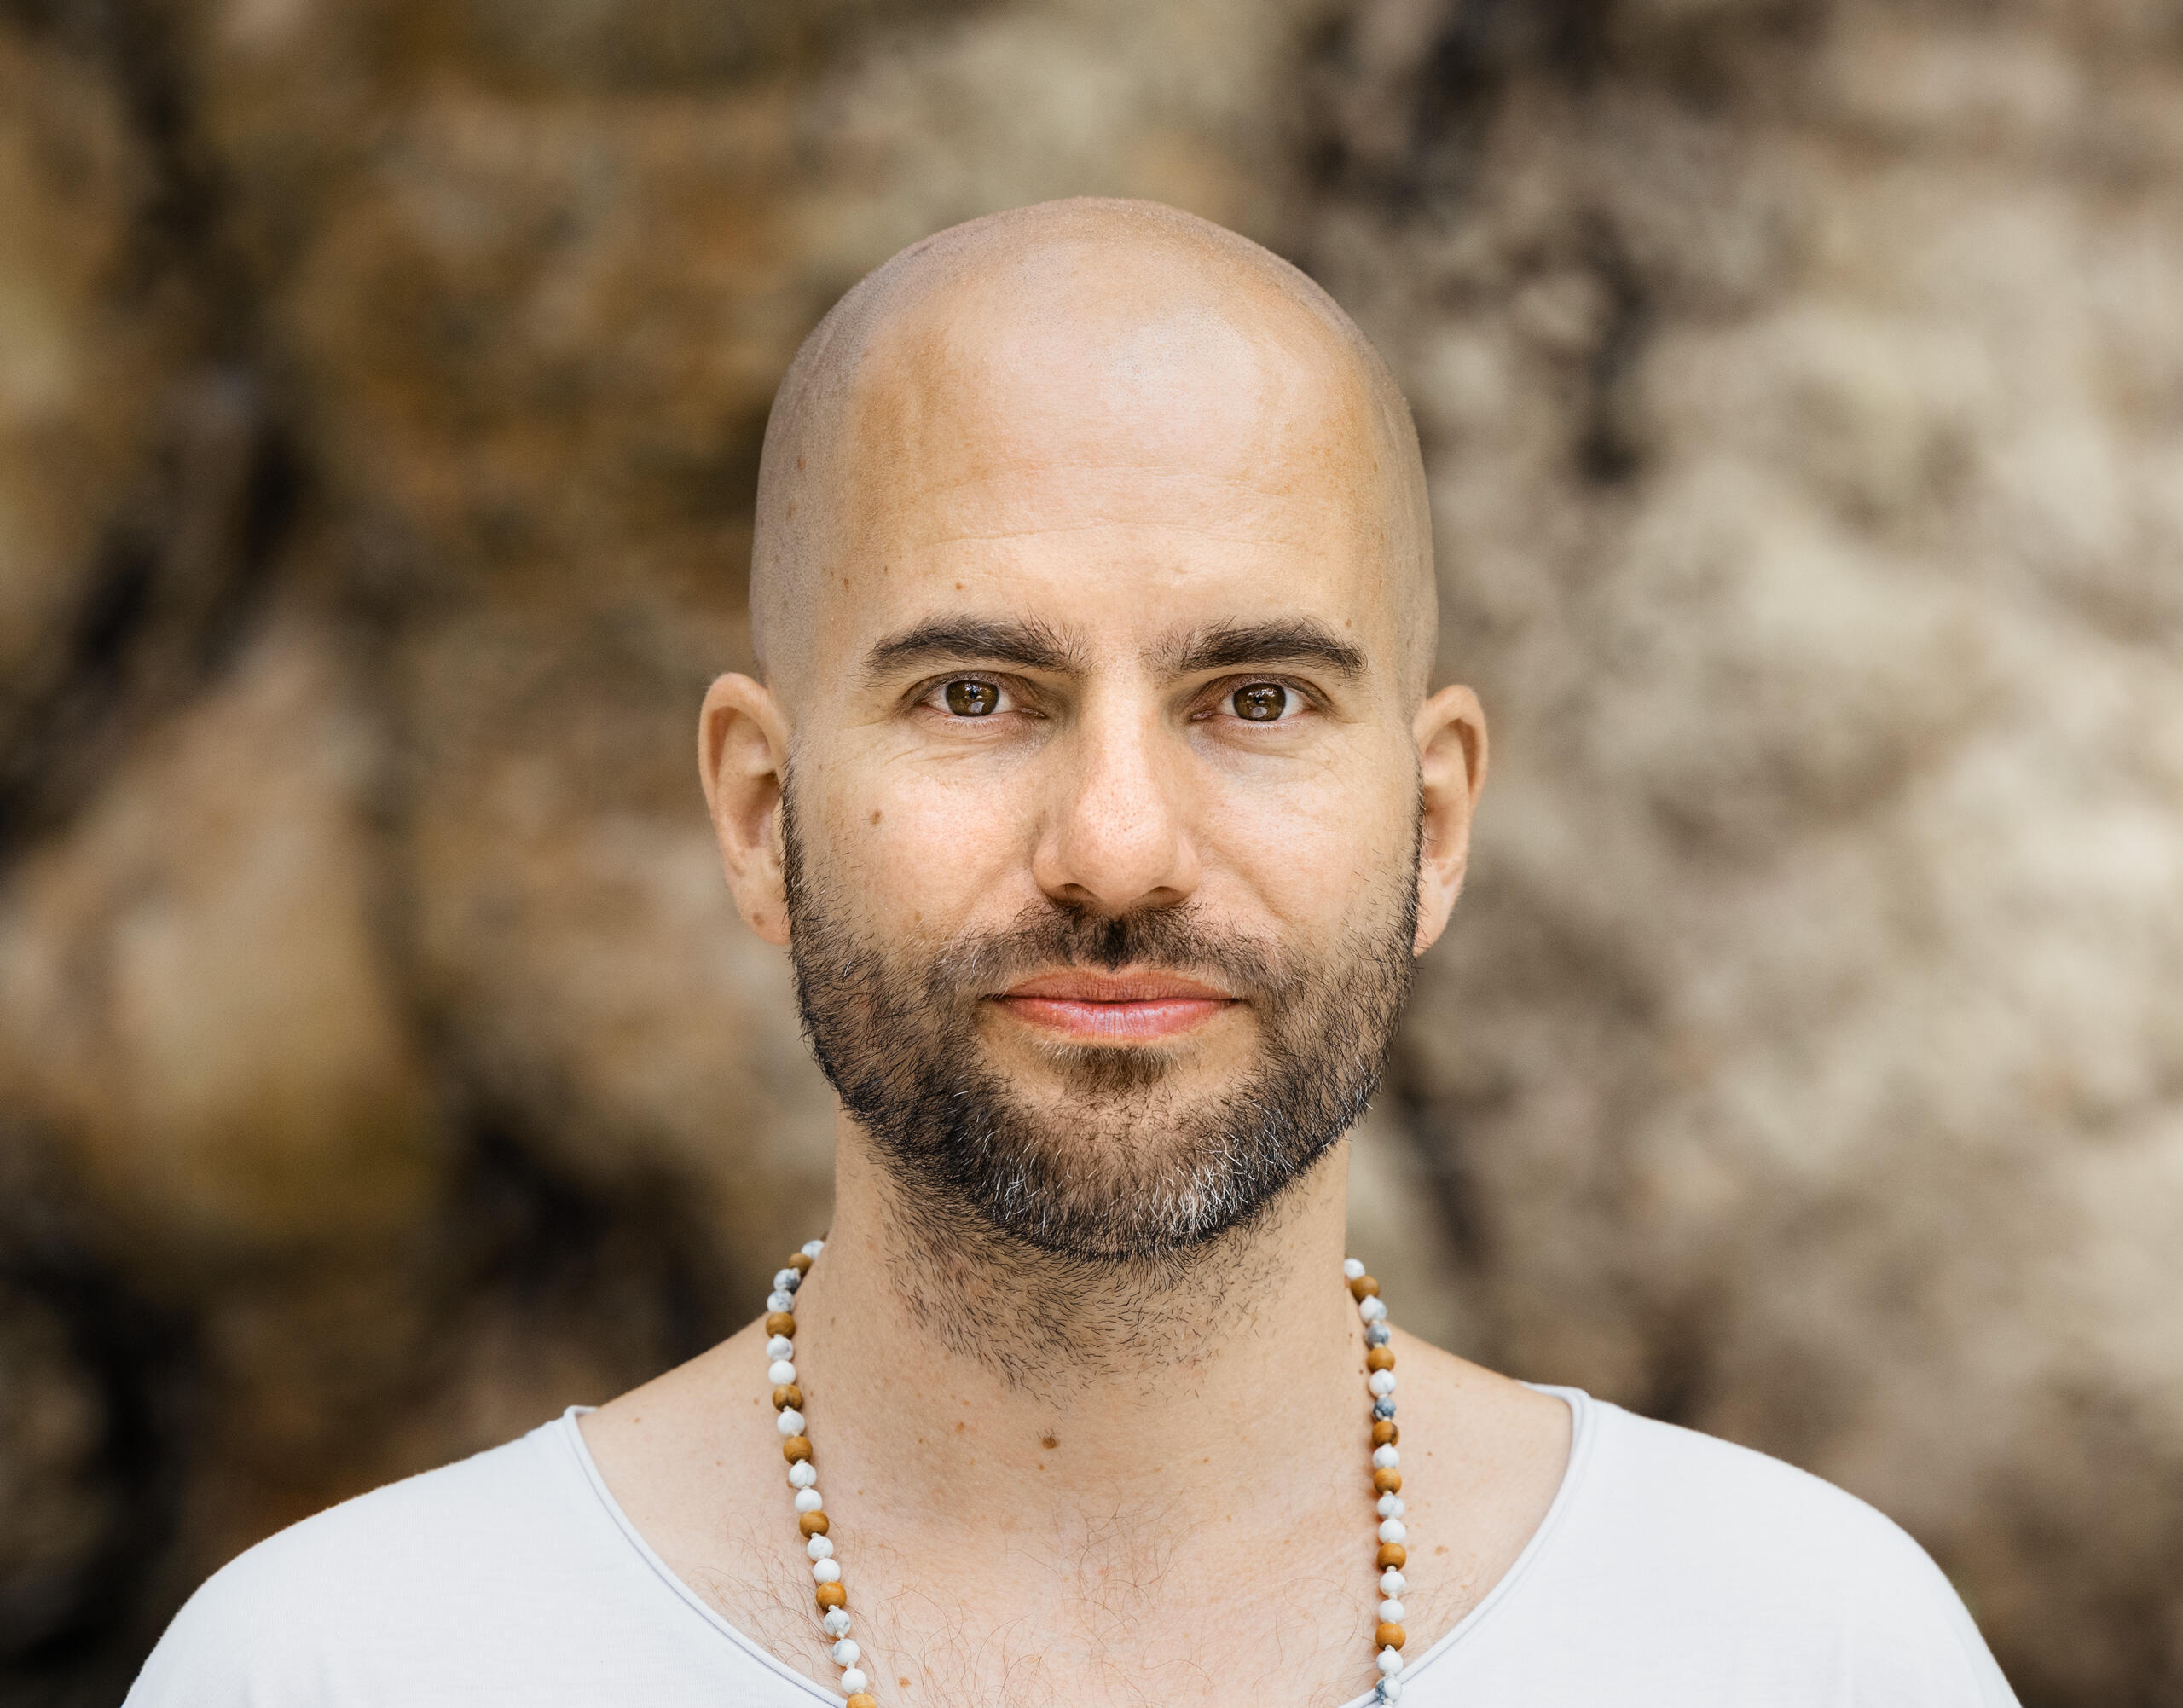 A portrait photograph of the musician Seom. He is wearing a white T-shirt, a necklace of brown and white beads and is looking straight into the camera. Rocks can be seen blurred in the background.